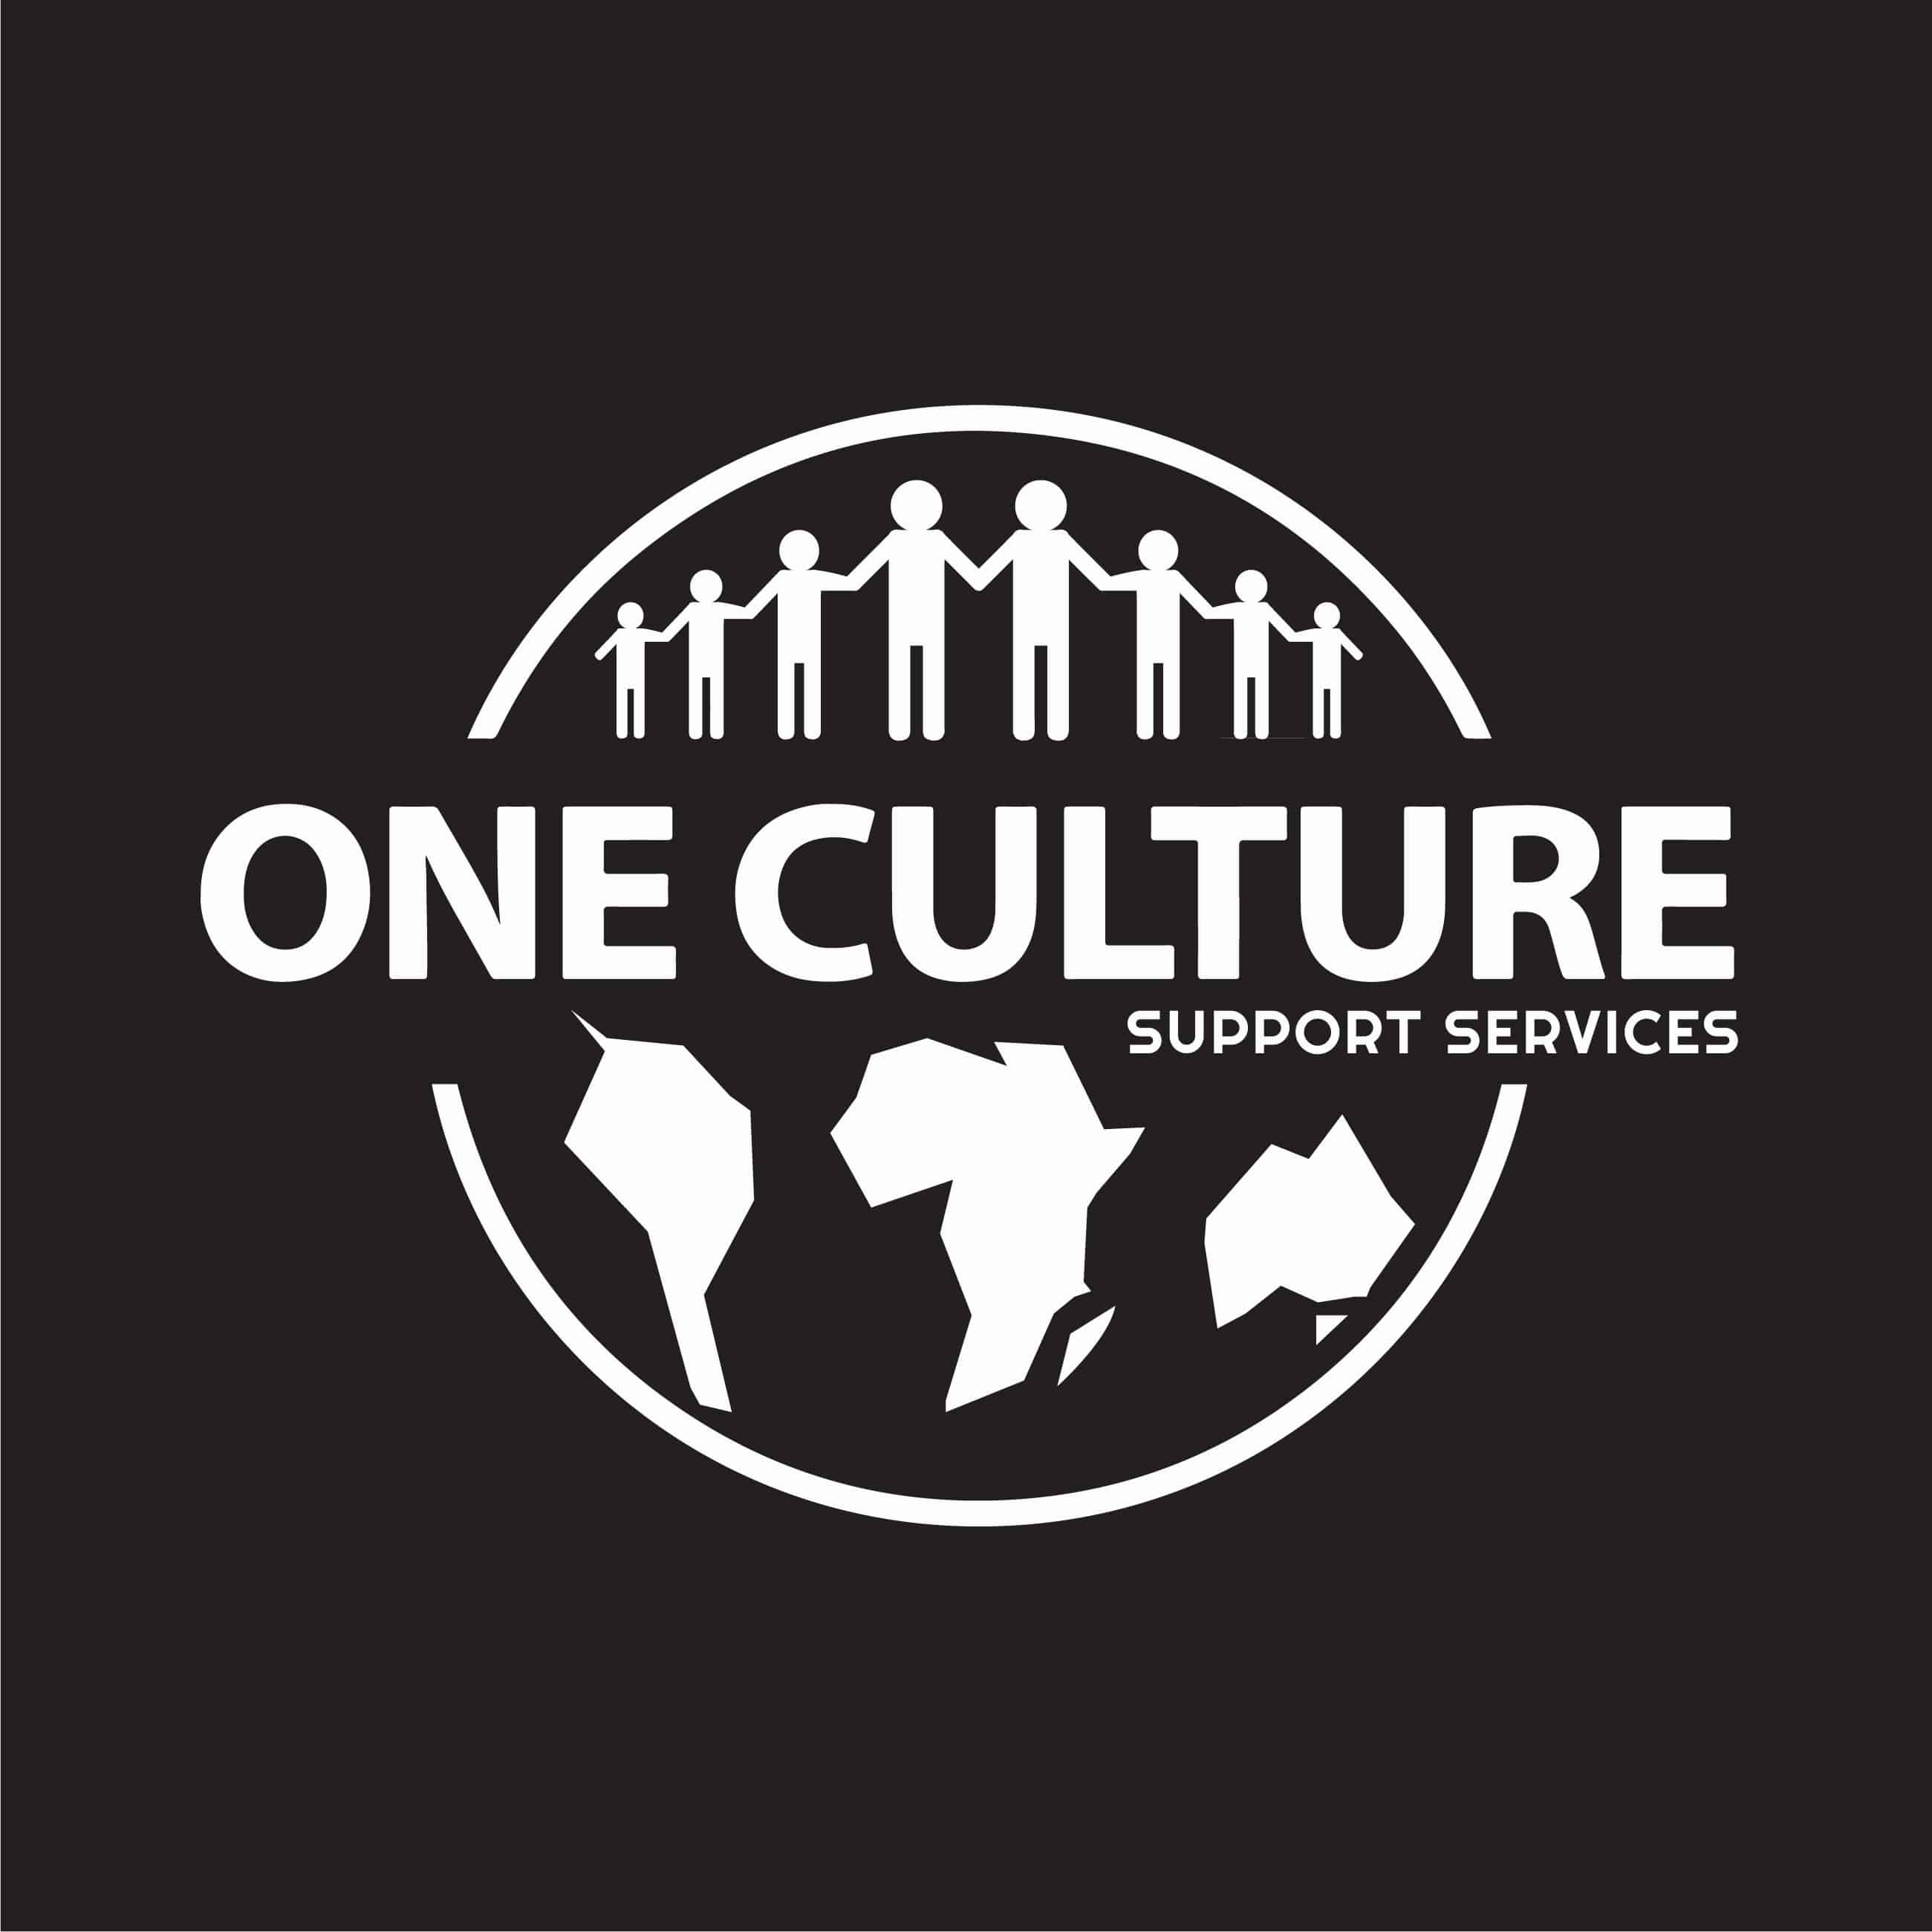 Once Culture support services logo in black and white